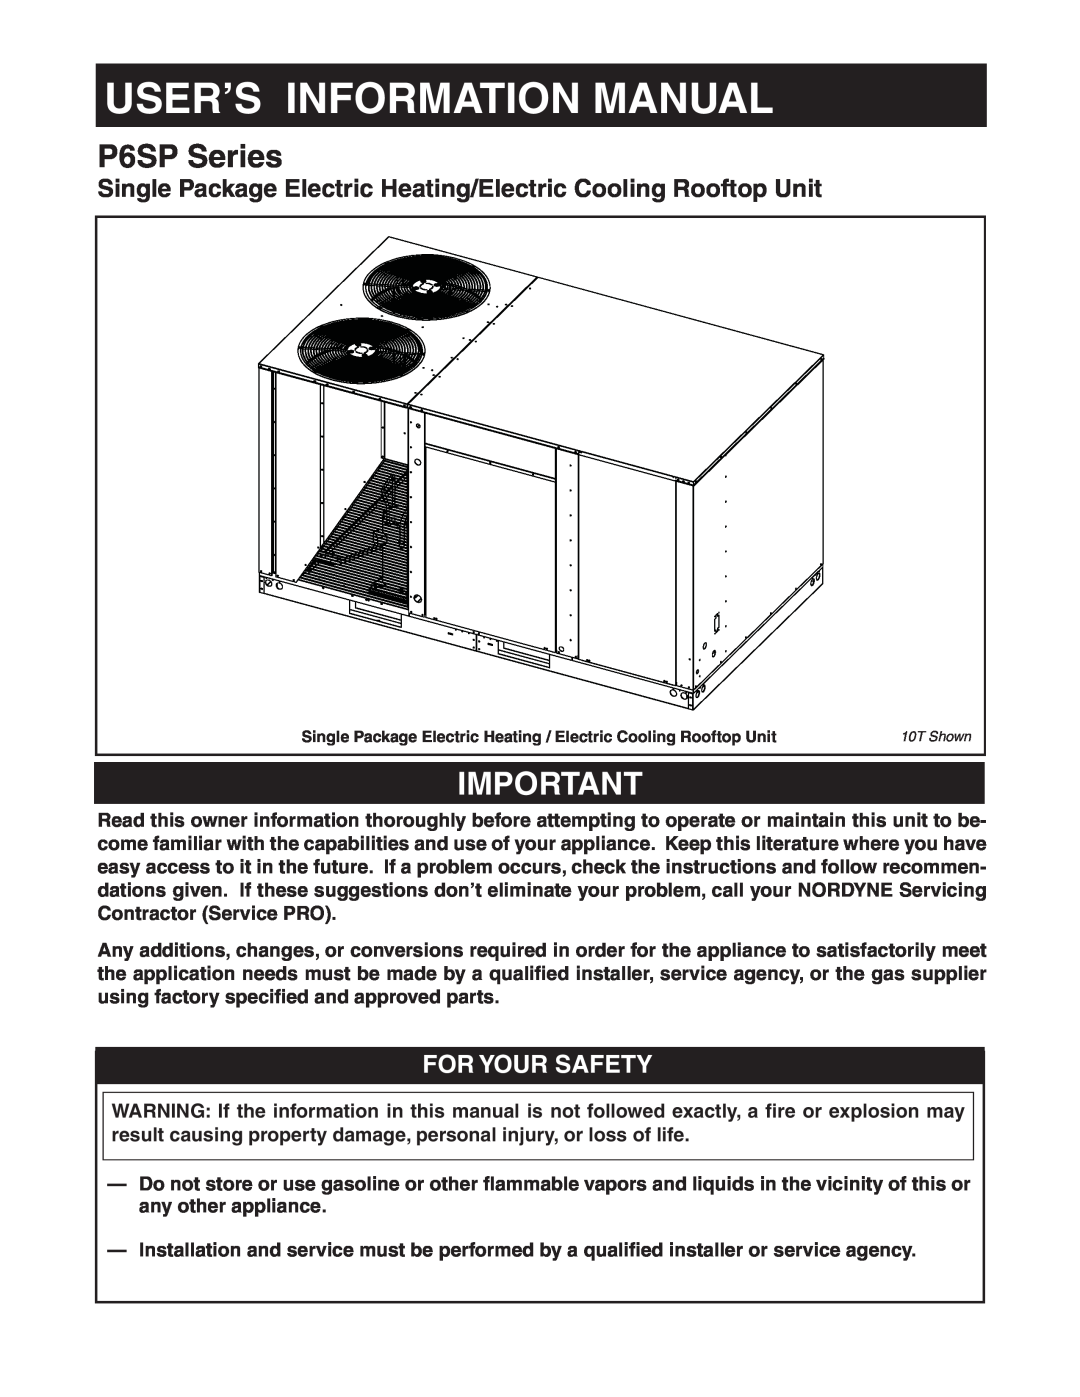 Nordyne P6SP Series manual User’S Information Manual, For Your Safety 